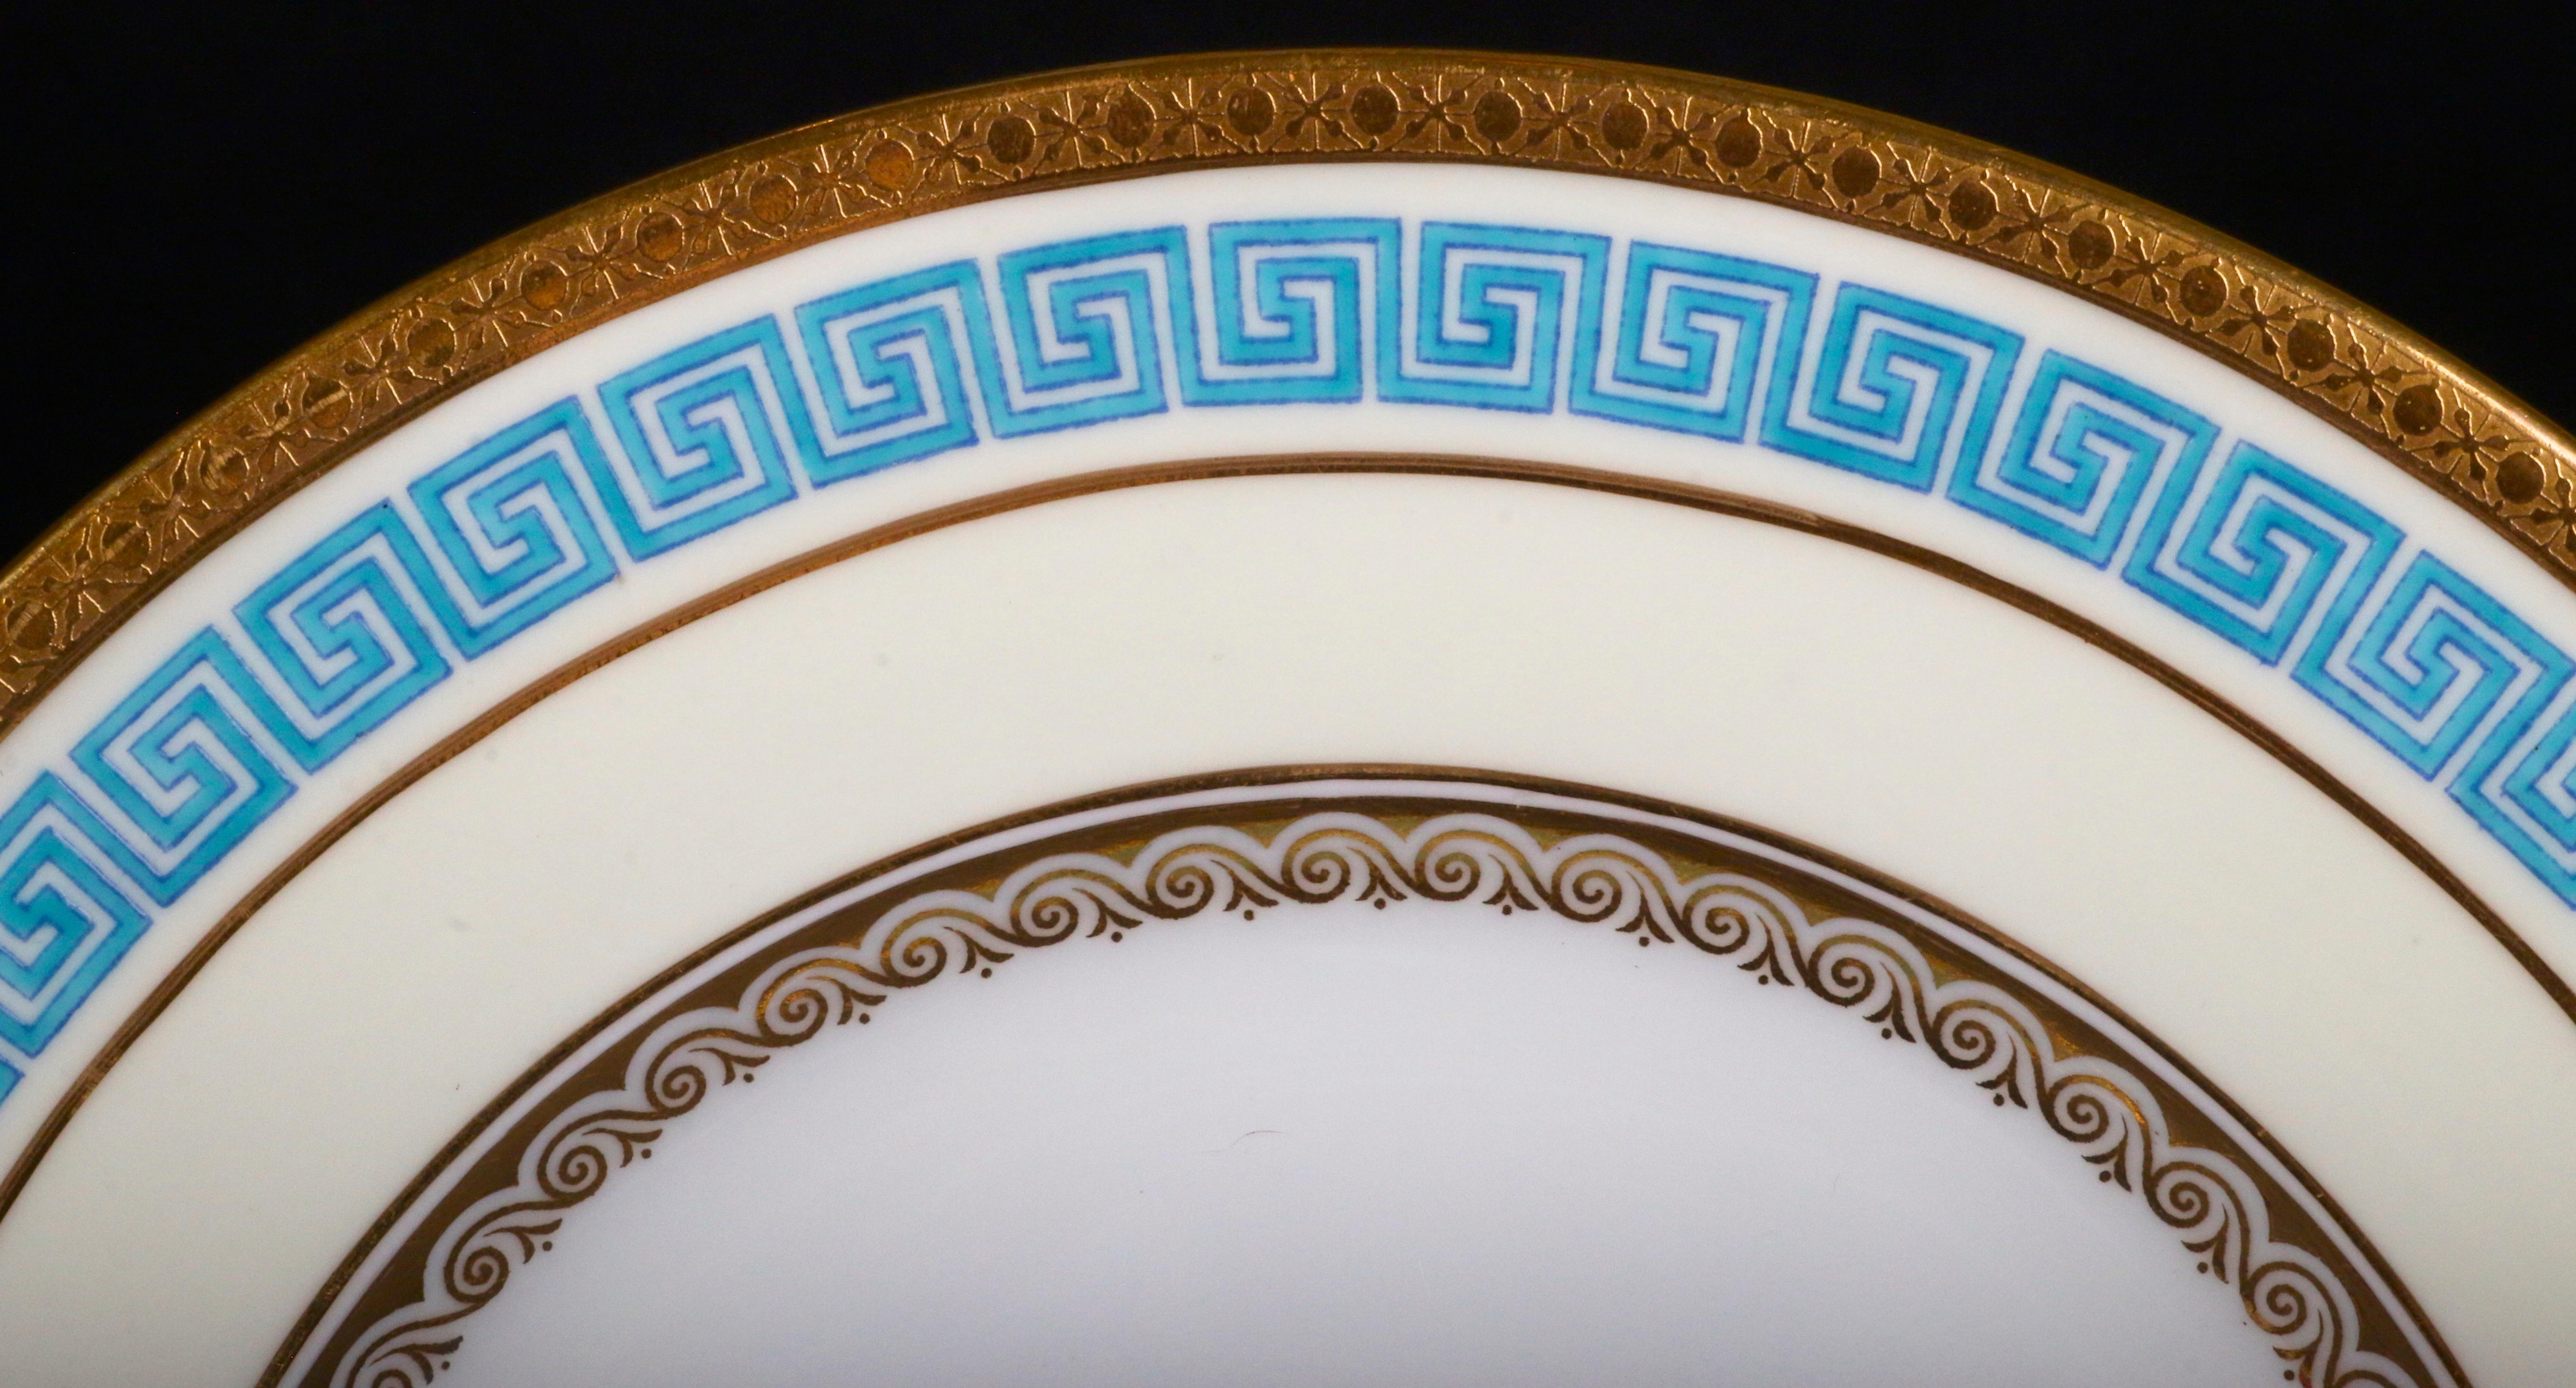 These 12 Minton antique neoclassical style plates from Minton, Stoke-on-Trent, England. Are perfect for lunch, appetizer, salad or dessert. The decoration on these plates utilizes 2 classical Greek patterns: an enamel celeste-bleu (heavenly blue) or